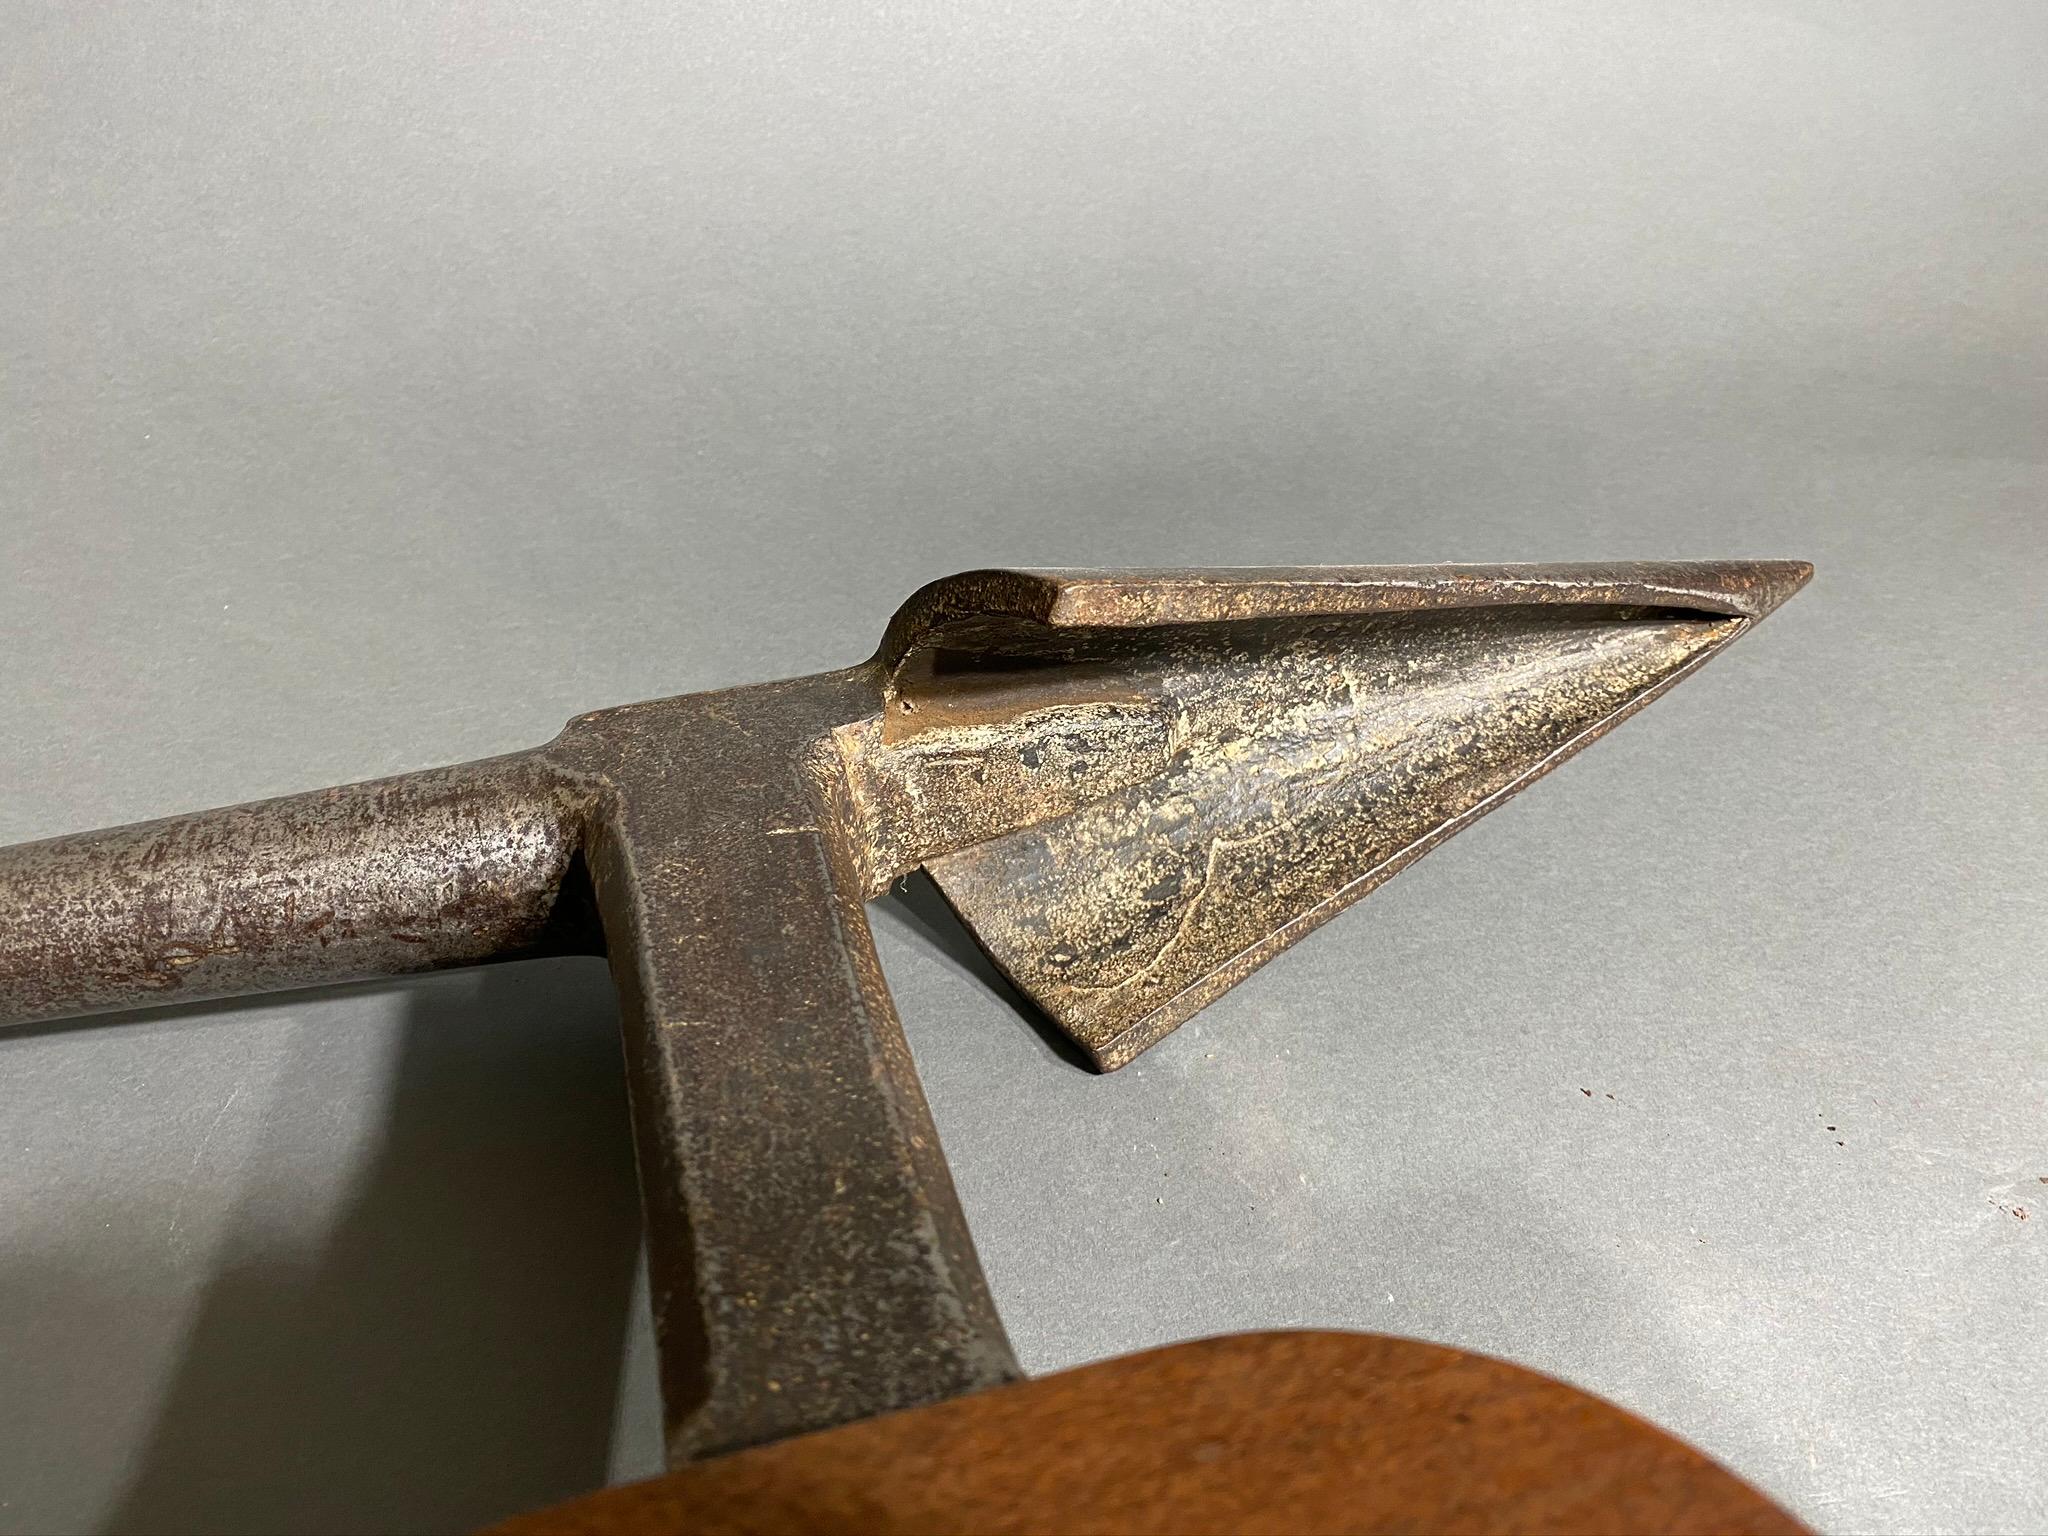 Antique Tinsmith's Blowhorn Stake Anvil